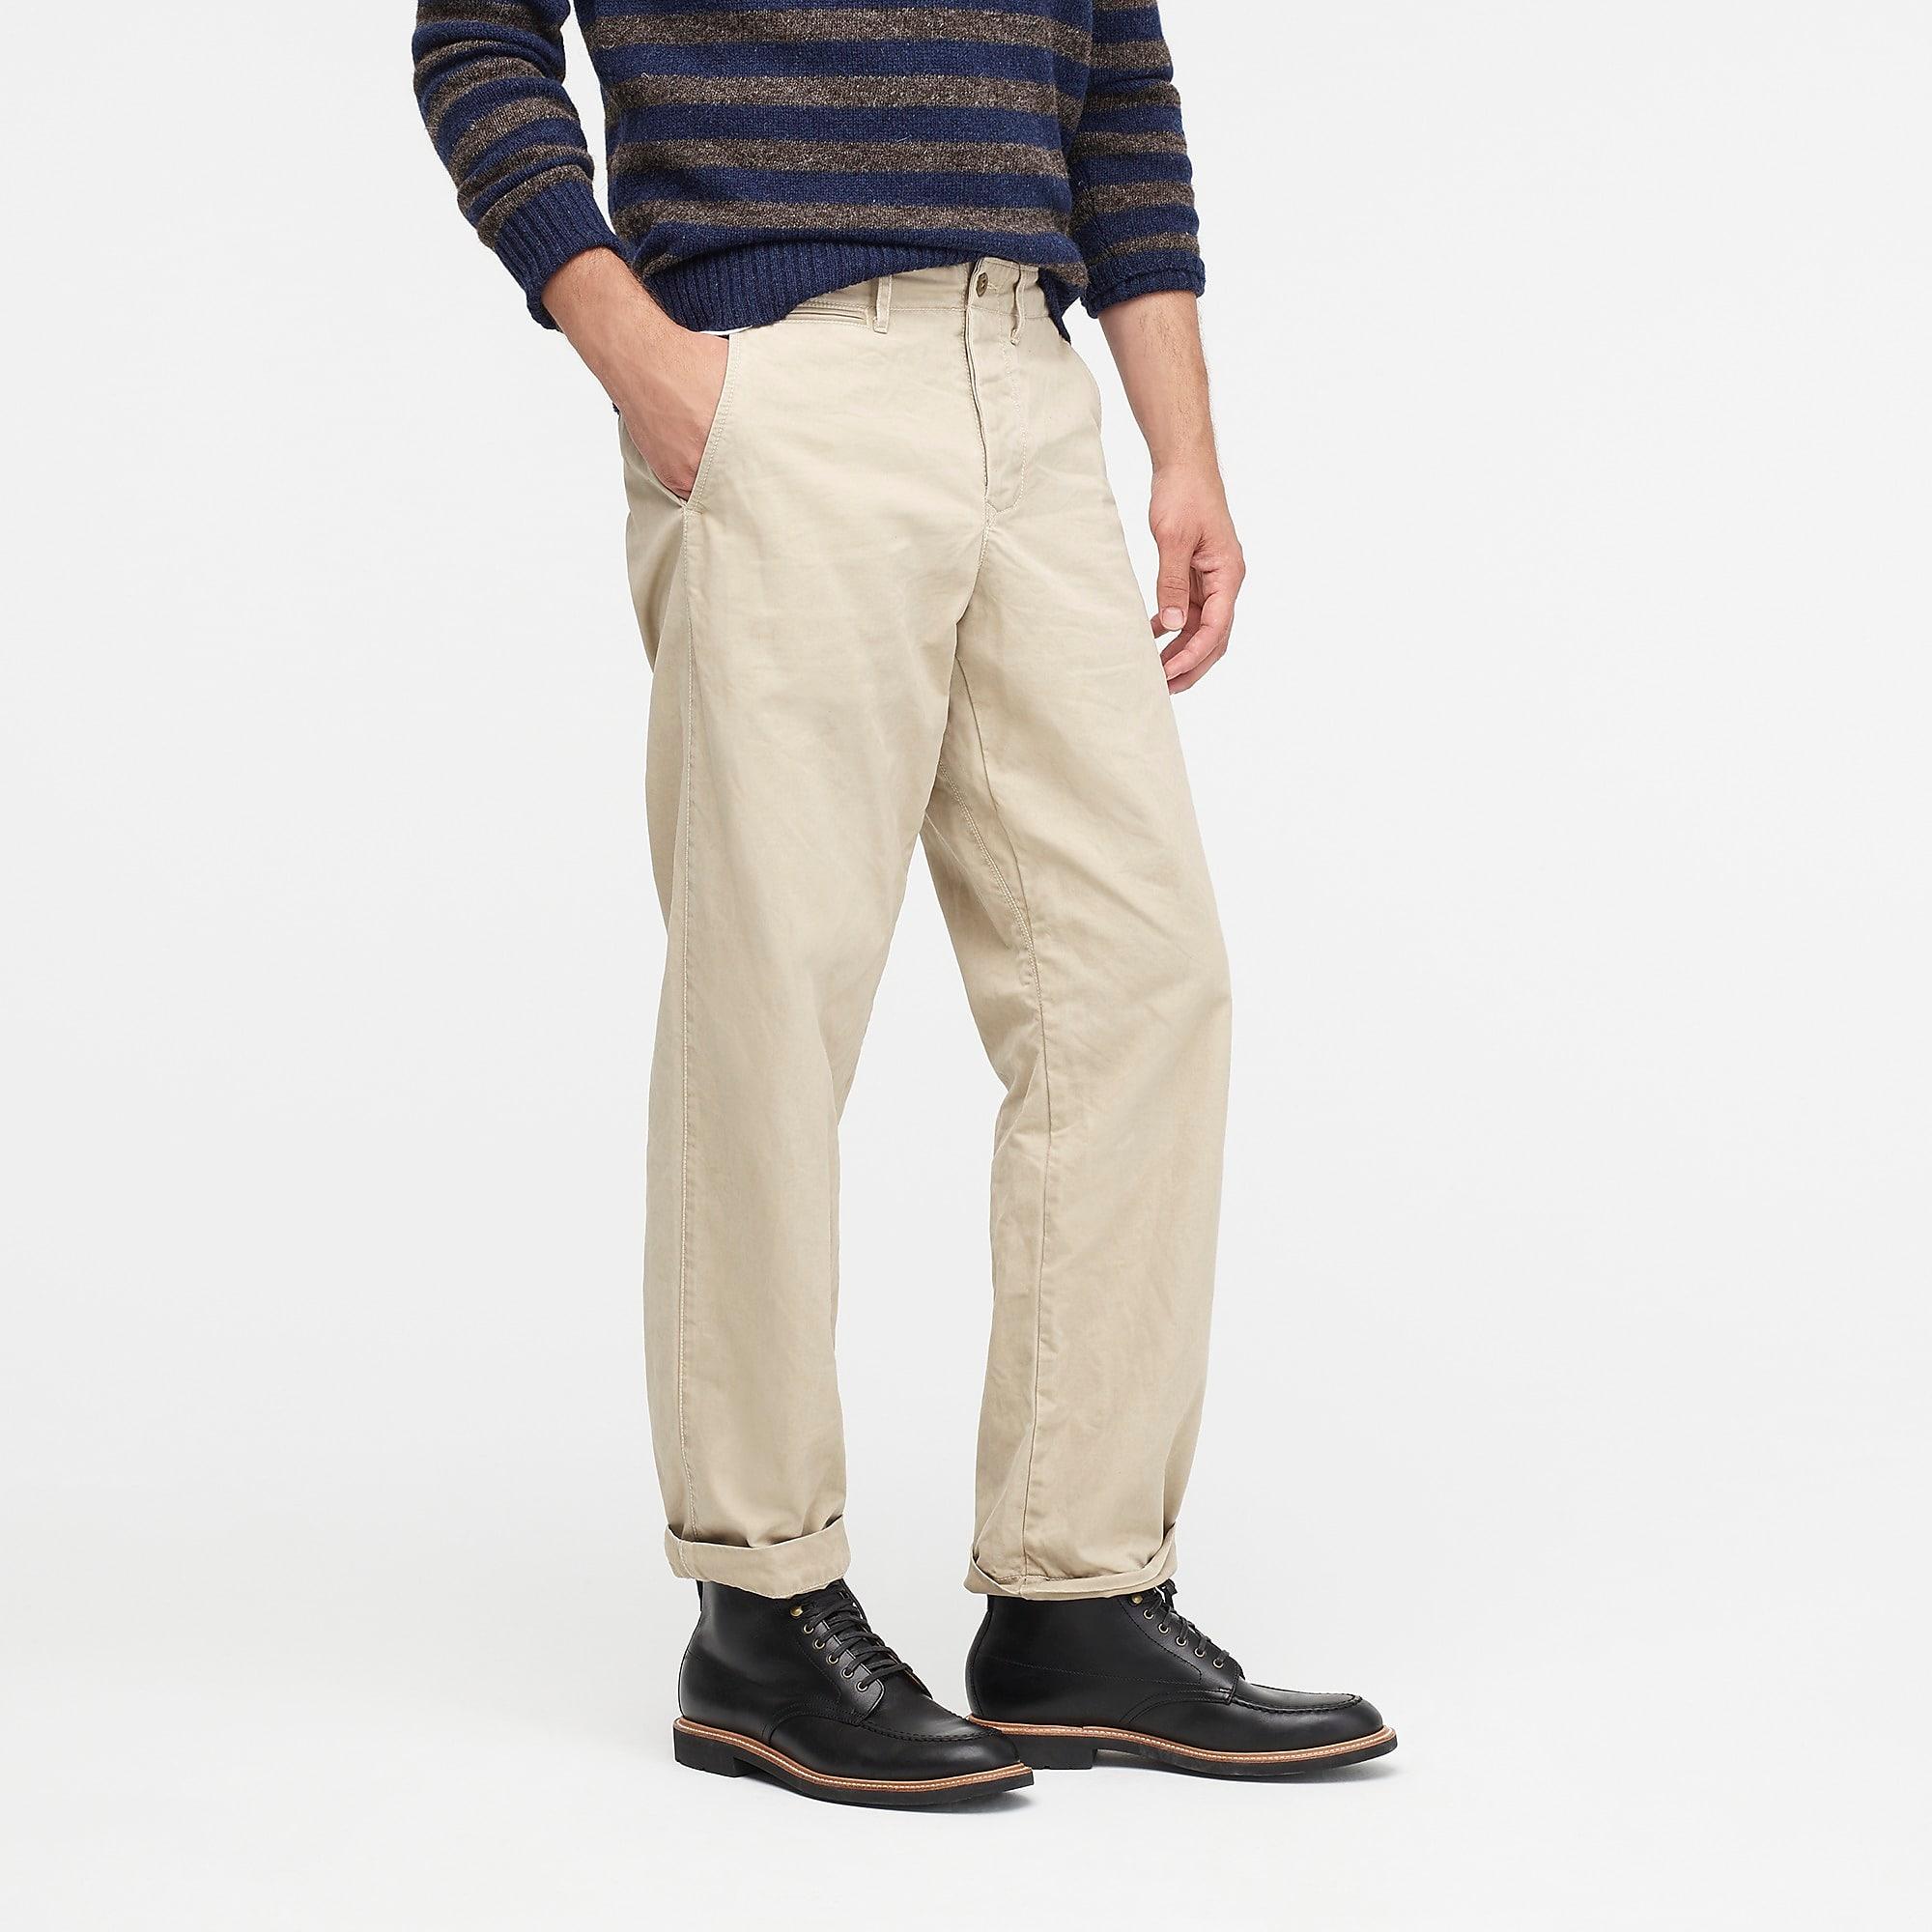 J.Crew Wallace & Barnes Military Officer's Chino In Khaki Cotton Twill ...